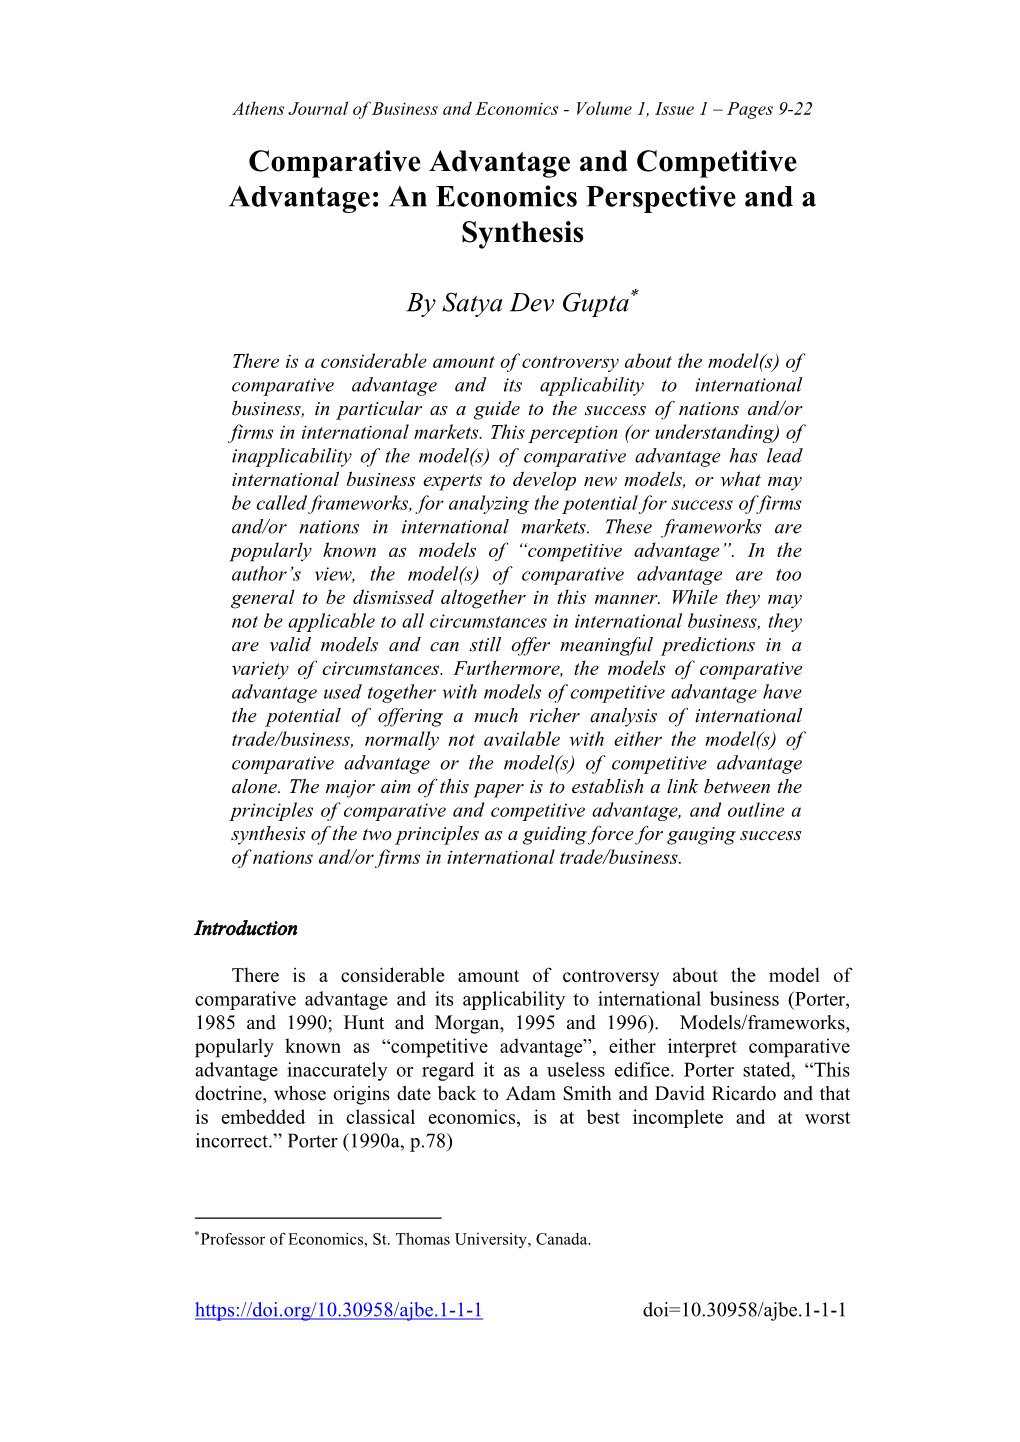 An Economics Perspective and a Synthesis